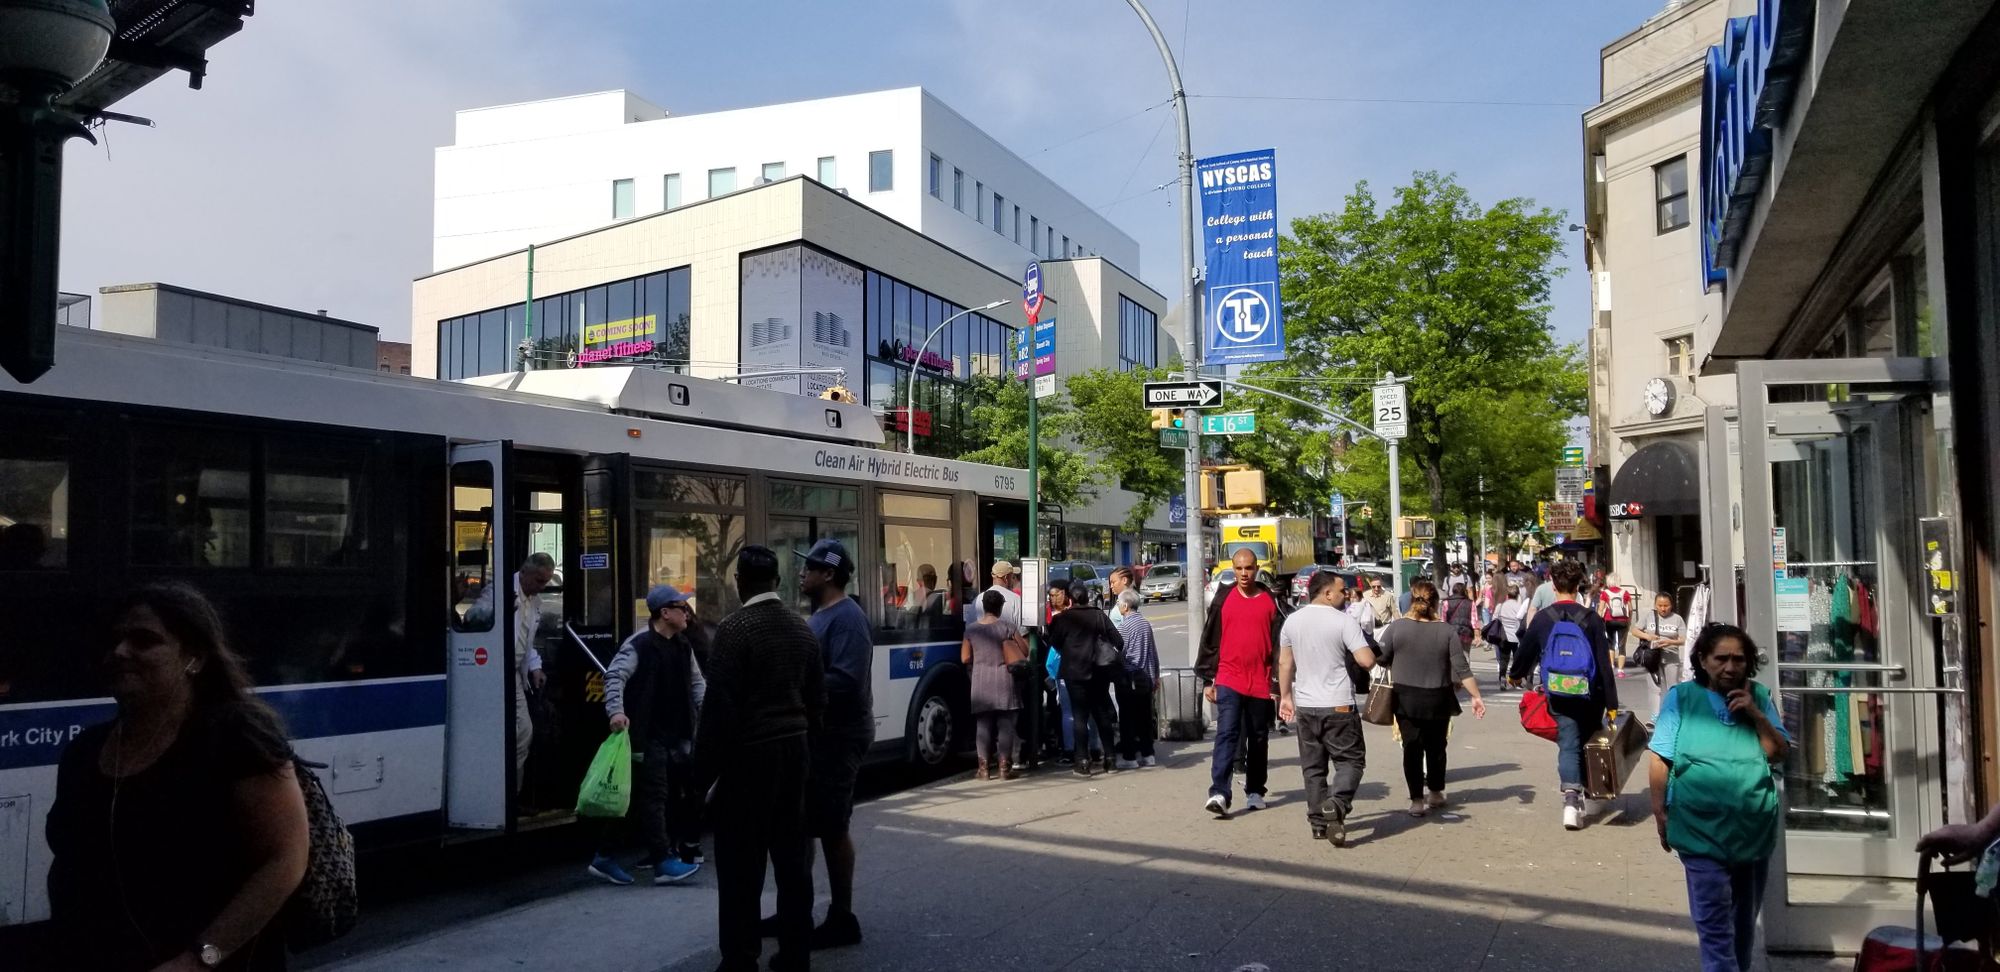 Two alternatives for the select bus route along Kings Highway